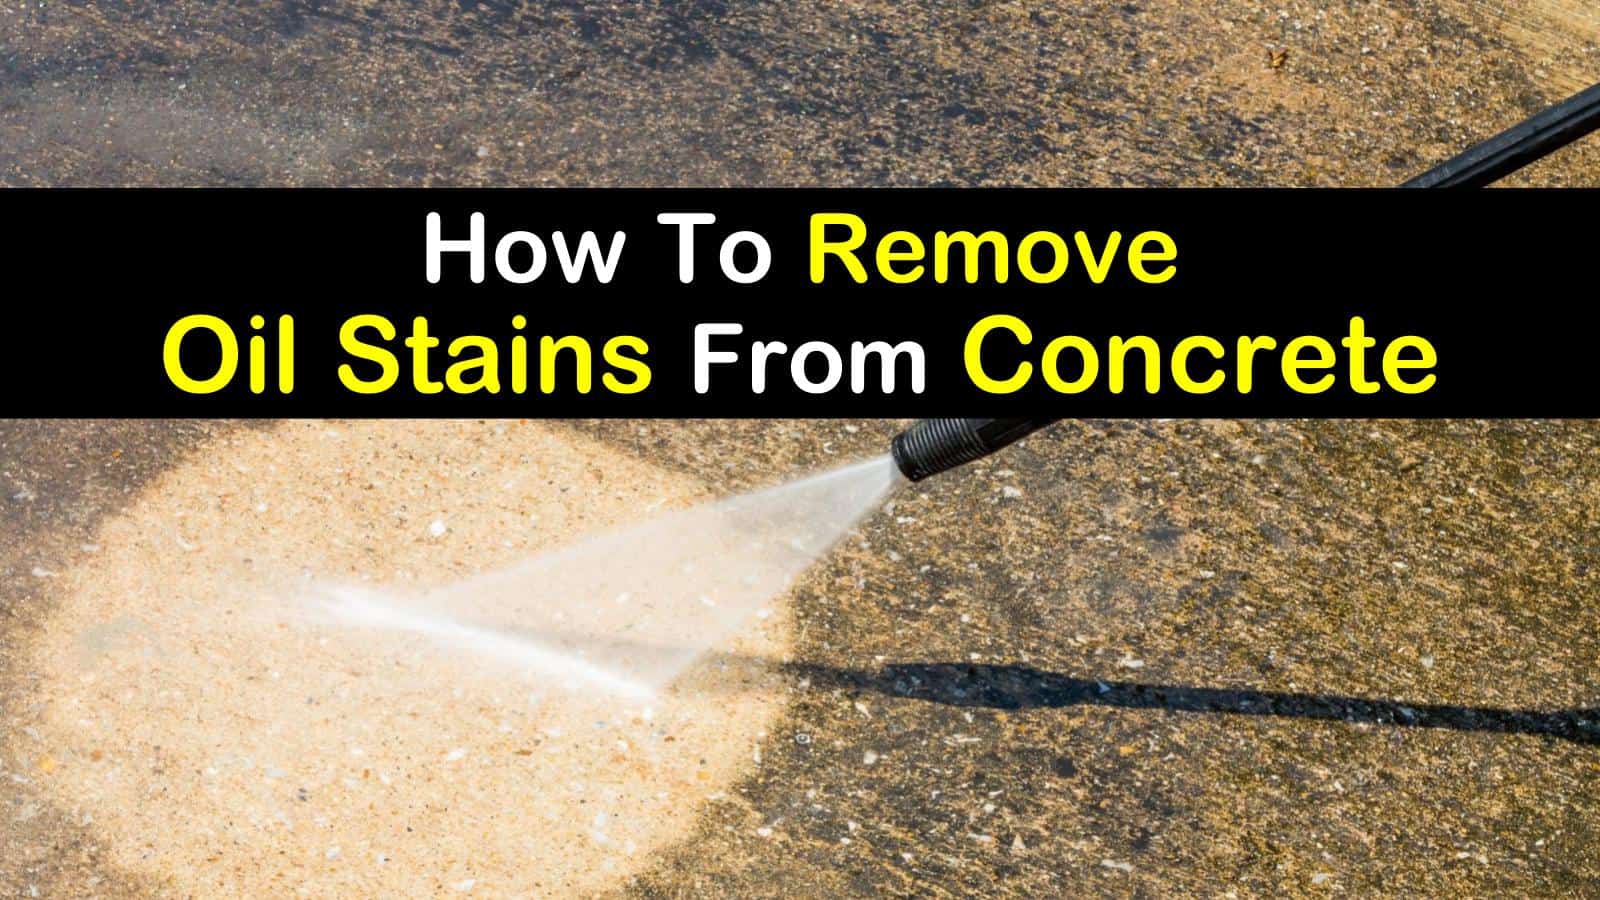 10 Fast & Easy Ways to Remove Oil Stains from Concrete